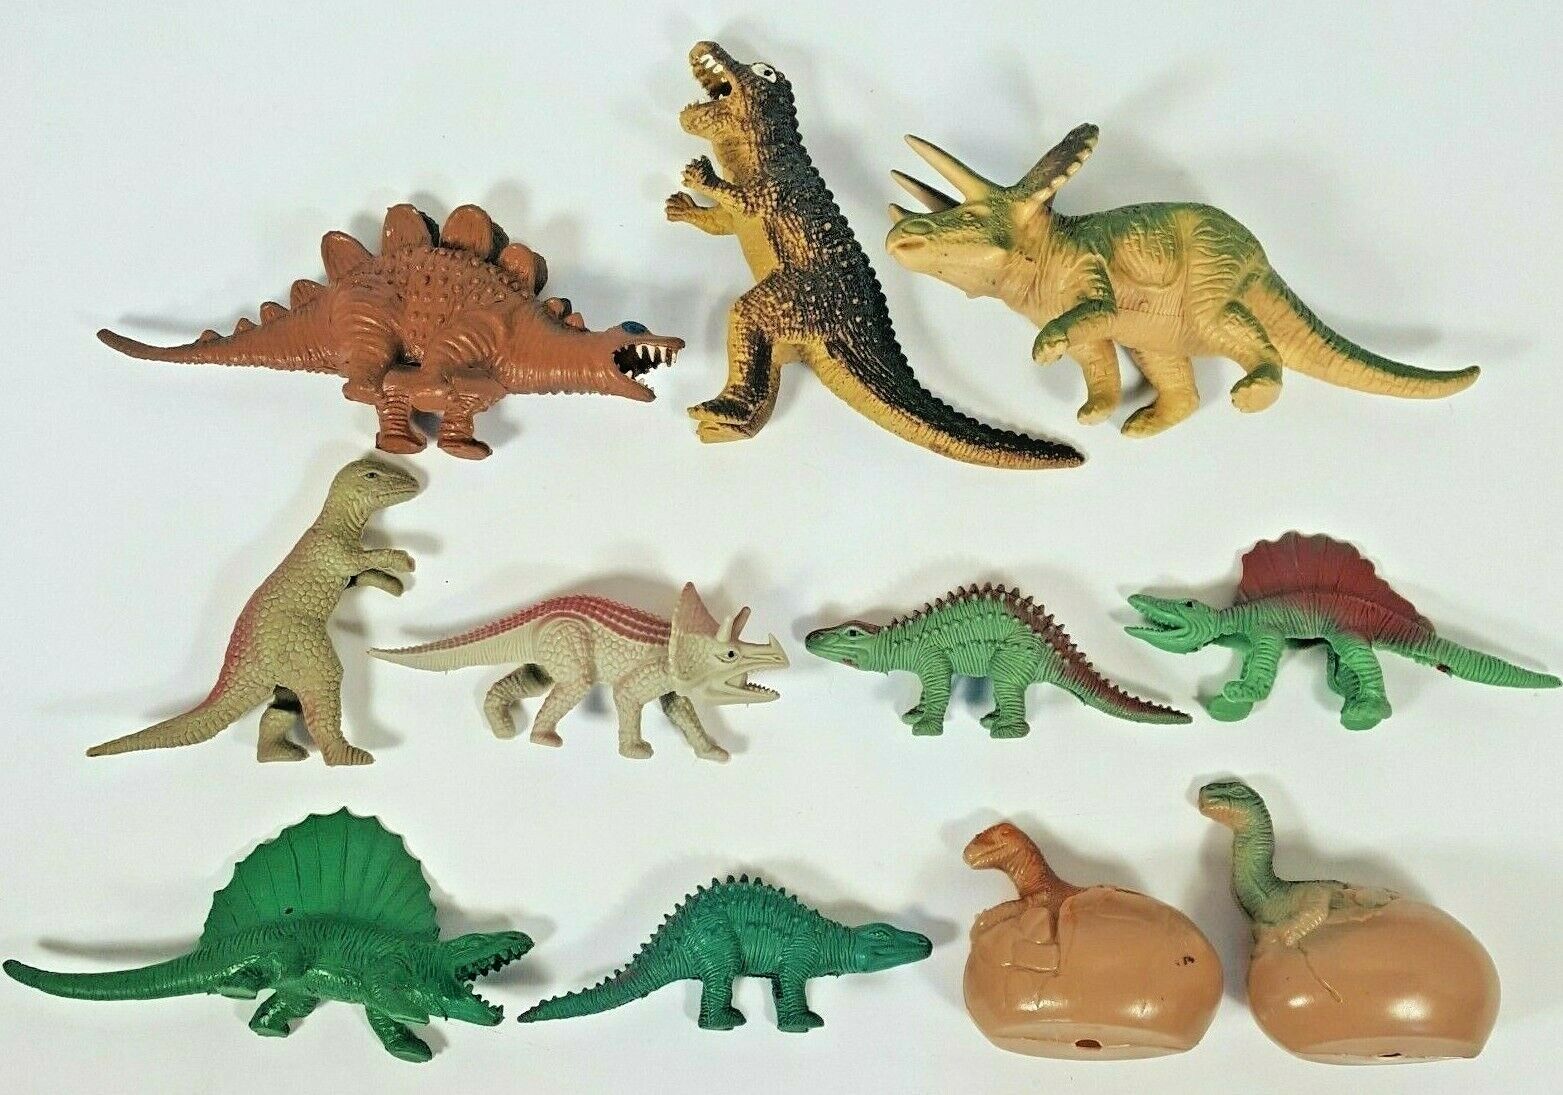 Vintage Plastic and Rubber Toy Dinosaurs Lot of 11 Assorted Prehistoric Figures